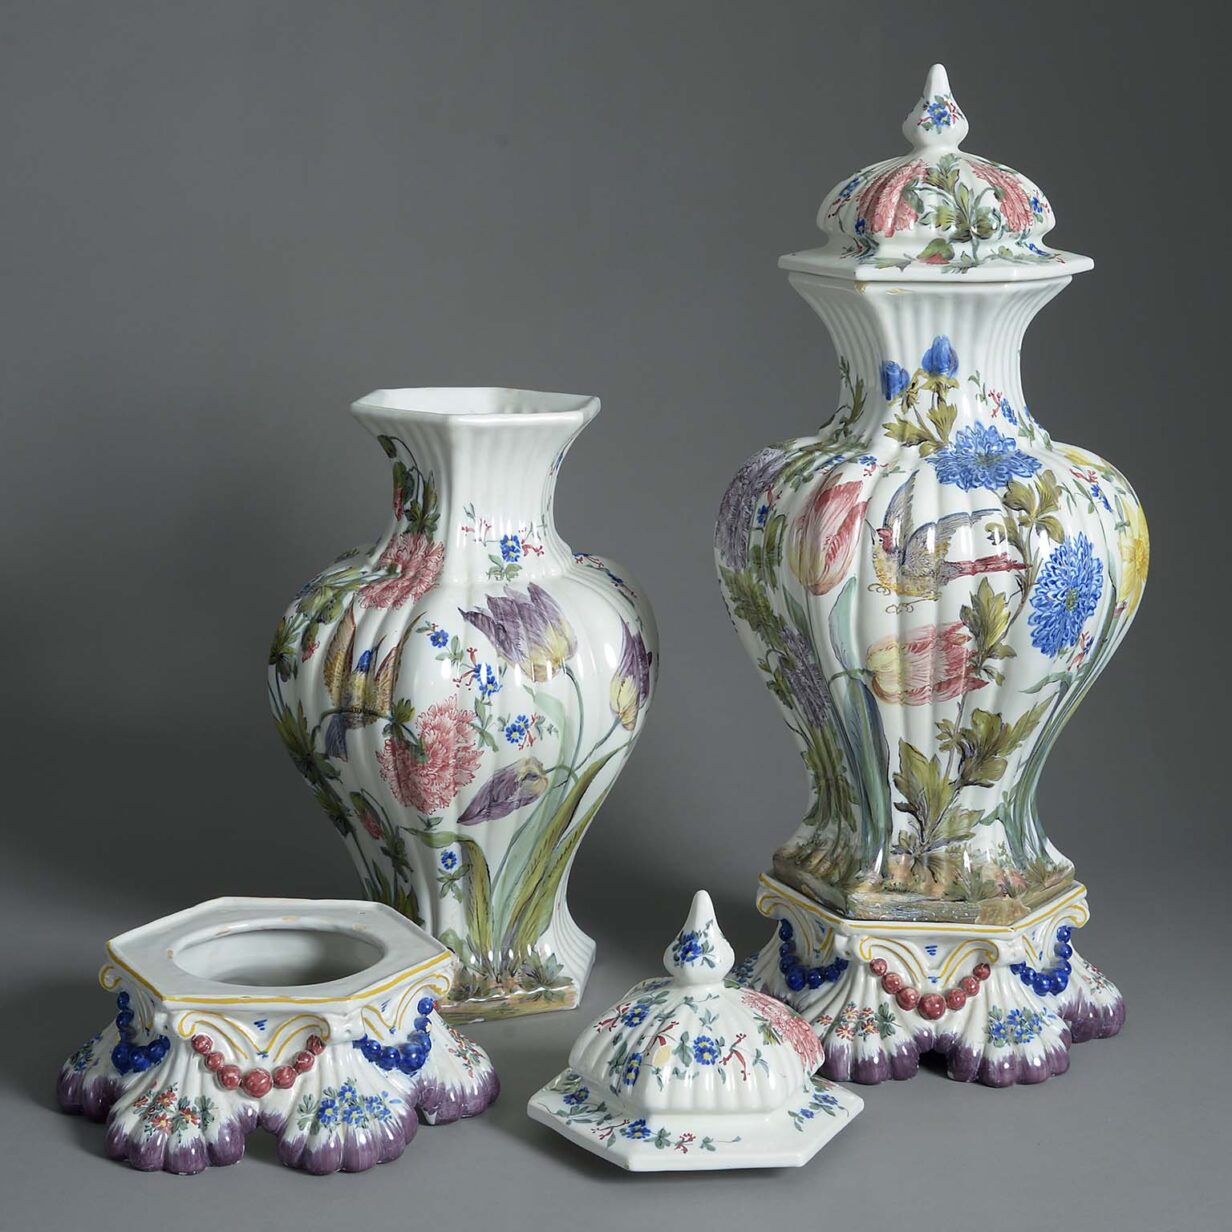 Pair of 19th century nove faience polychrome pottery vases